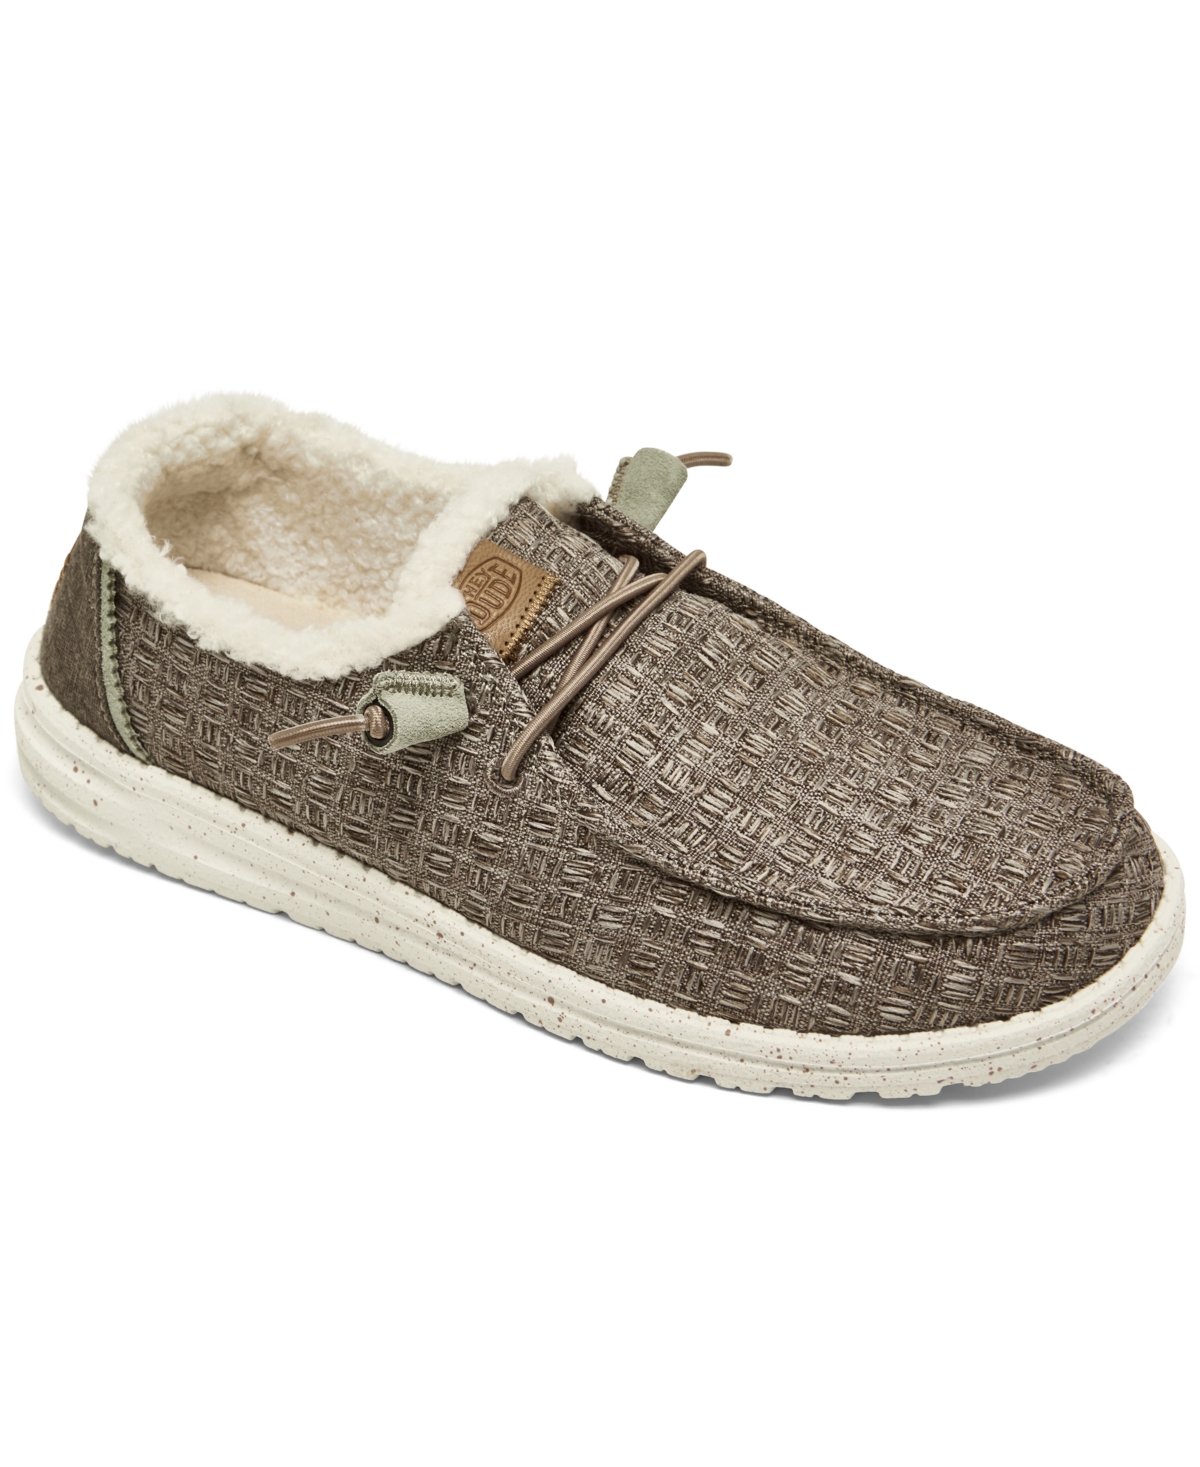 Women's Wendy Warmth Slip-On Casual Sneakers from Finish Line - Brown